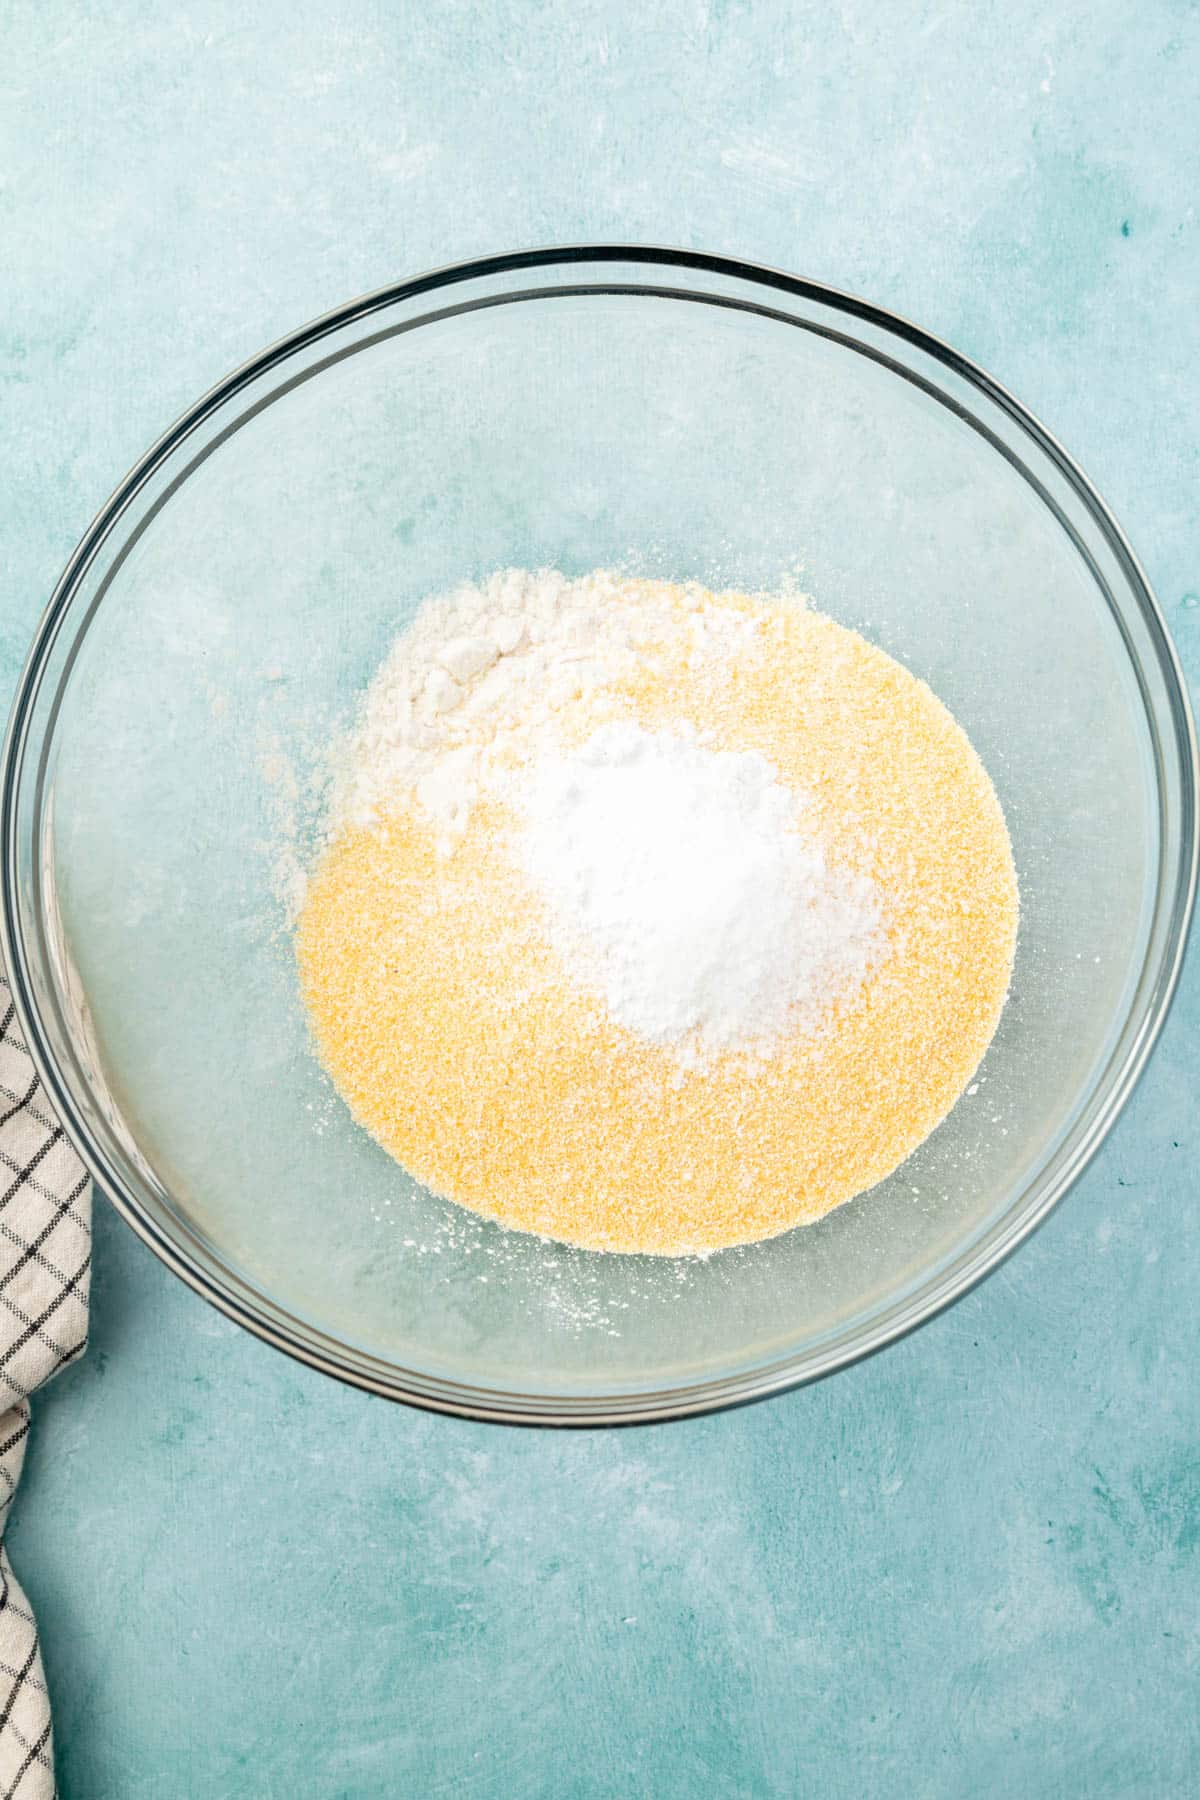 A glass mixing bowl with cornmeal, gluten-free flour, salt, baking soda, and baking powder before mixing.